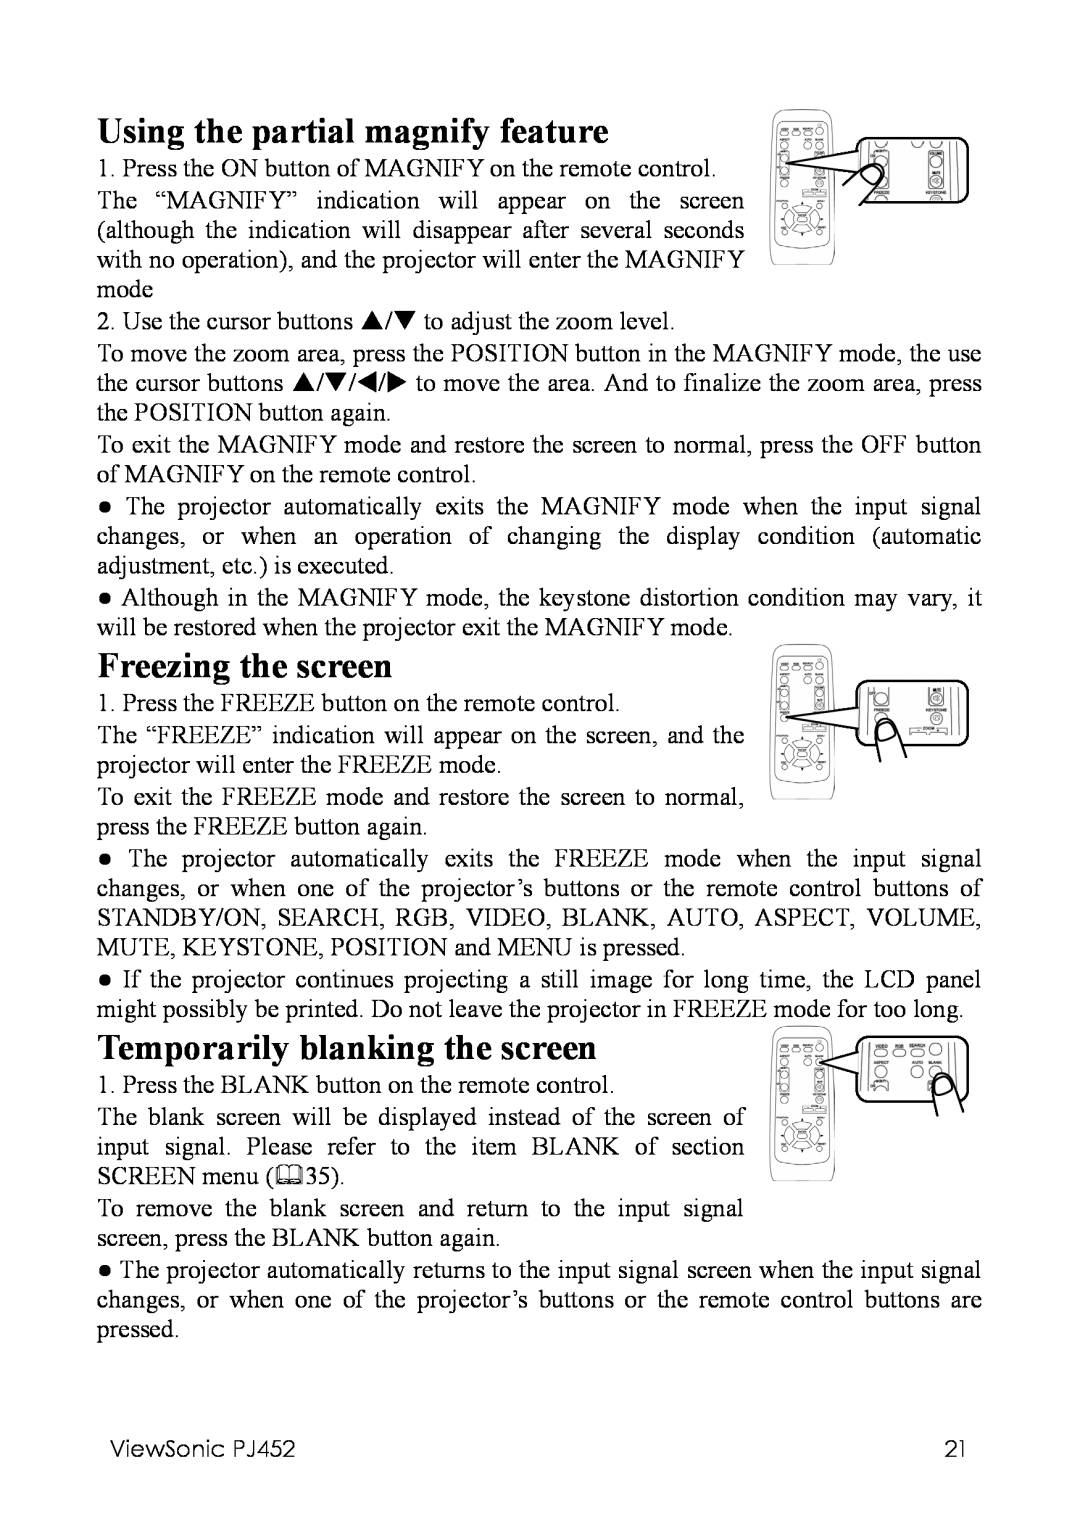 ViewSonic PJ452 manual Using the partial magnify feature, Freezing the screen, Temporarily blanking the screen 